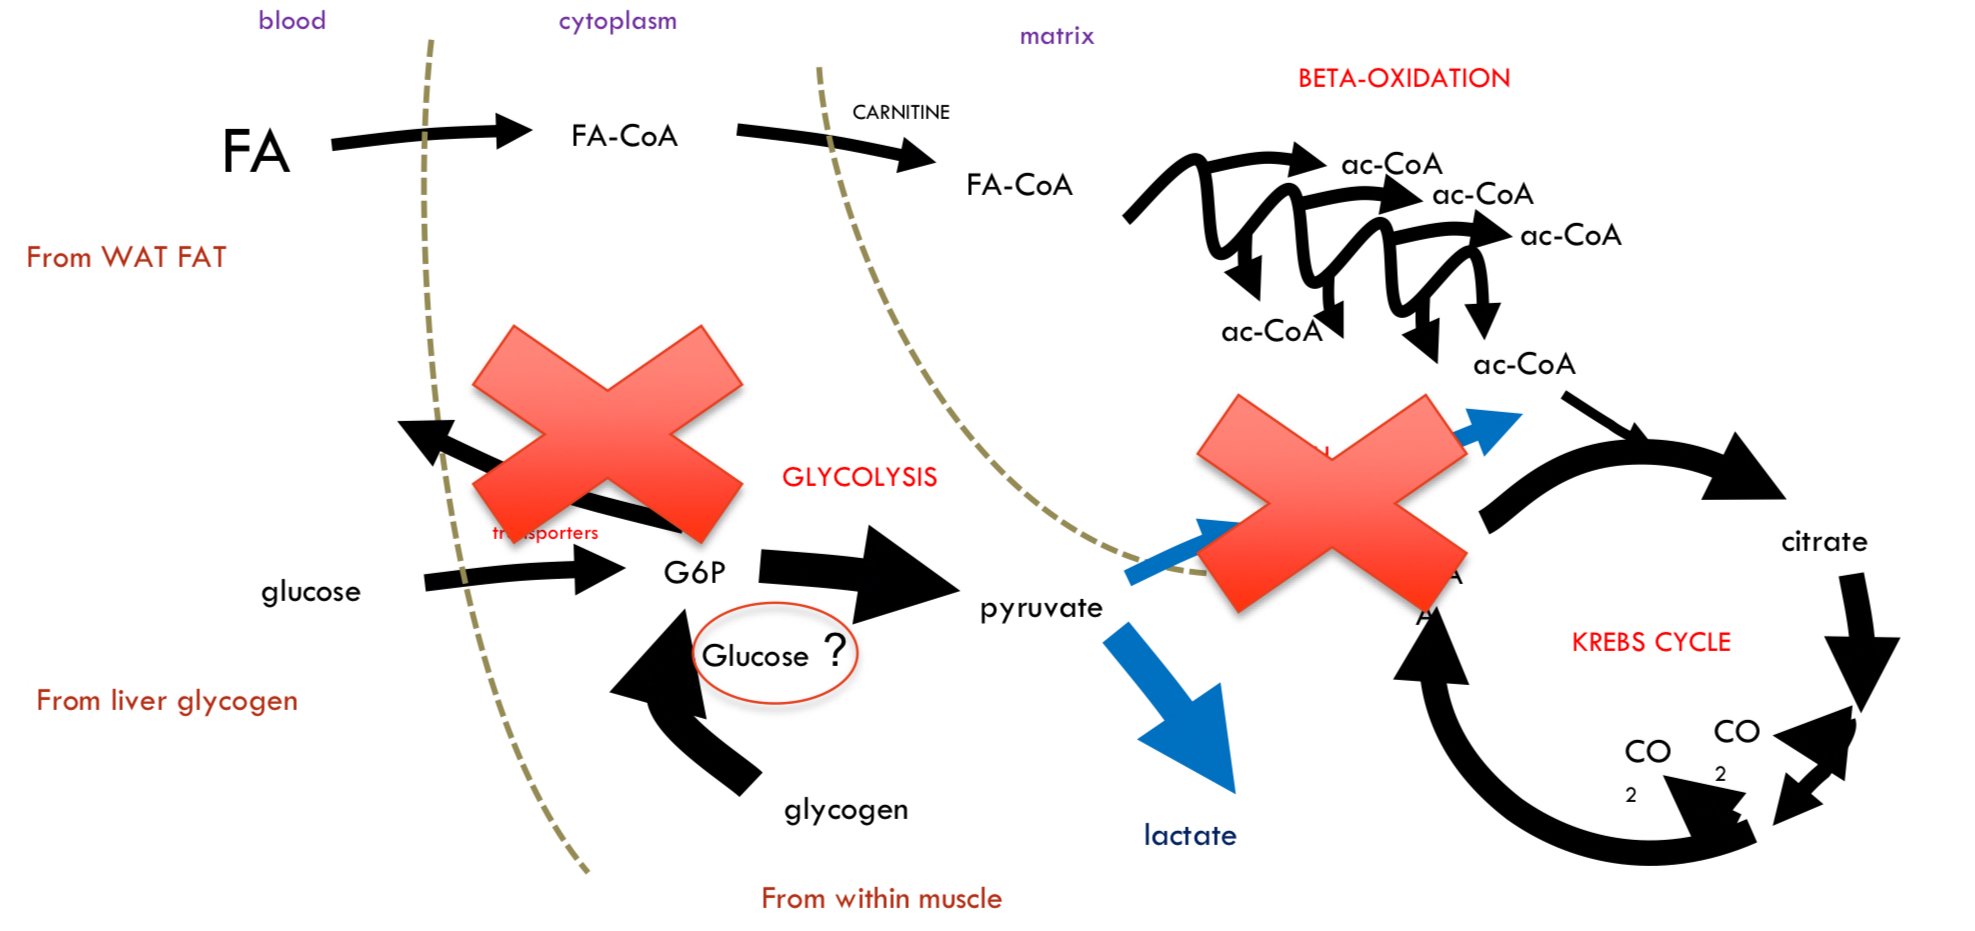 <ul><li><p>Muscle <u>doesn’t</u> breakdown glycogen much in starvation, bc</p><ul><li><p>NO glucagon receptors</p></li><li><p>NO <strong>G6Pase</strong> (only liver has)</p><p>↳ Cannot convert G6P to glucose → Cannot release glucose into blood.</p></li></ul></li><li><p>However, some glucose residues in glycogen are released as neat glucose</p><ul><li><p>B/c debranching enzyme uses water to hydrolysed the <strong>glycosidic linkages</strong>, not phosphate</p></li><li><p>≈ 10% potentially released</p></li></ul></li><li><p>Muscle is selfish with its glucagon, but what if PDH is inhibited, G6P will go to lactate</p></li></ul>